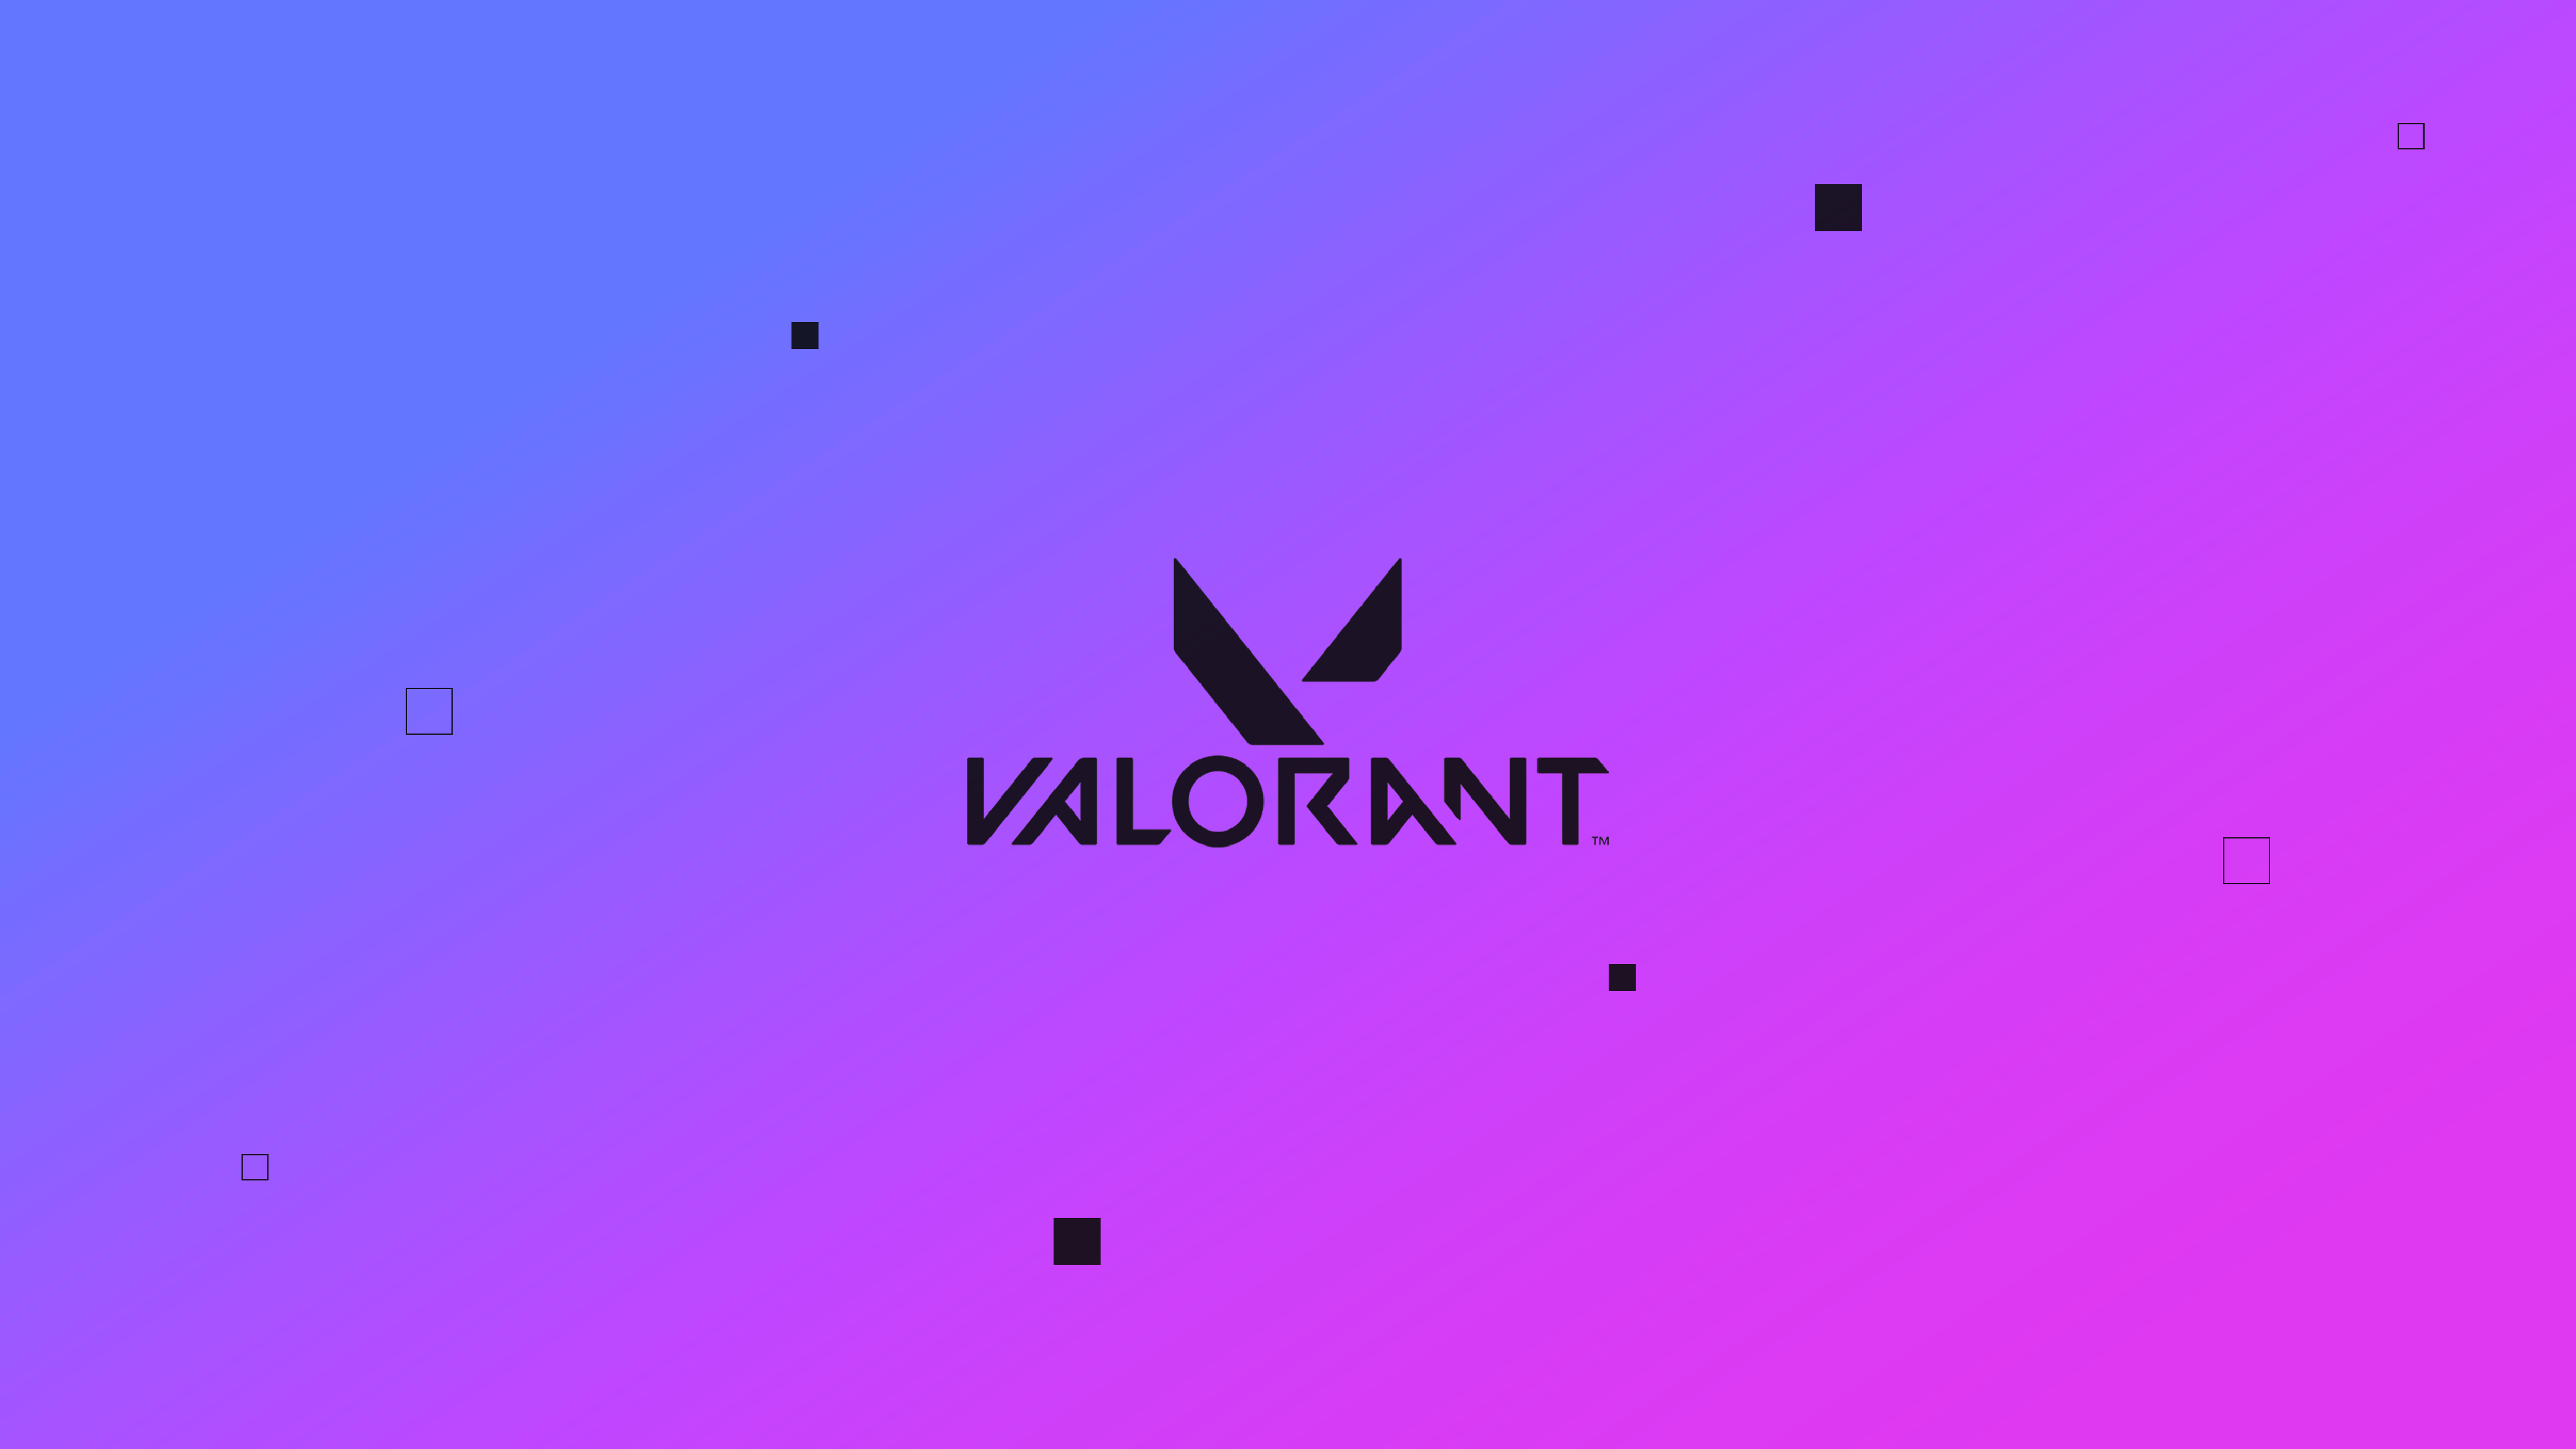 Updated my desktop for Valorant because the branding begged for it